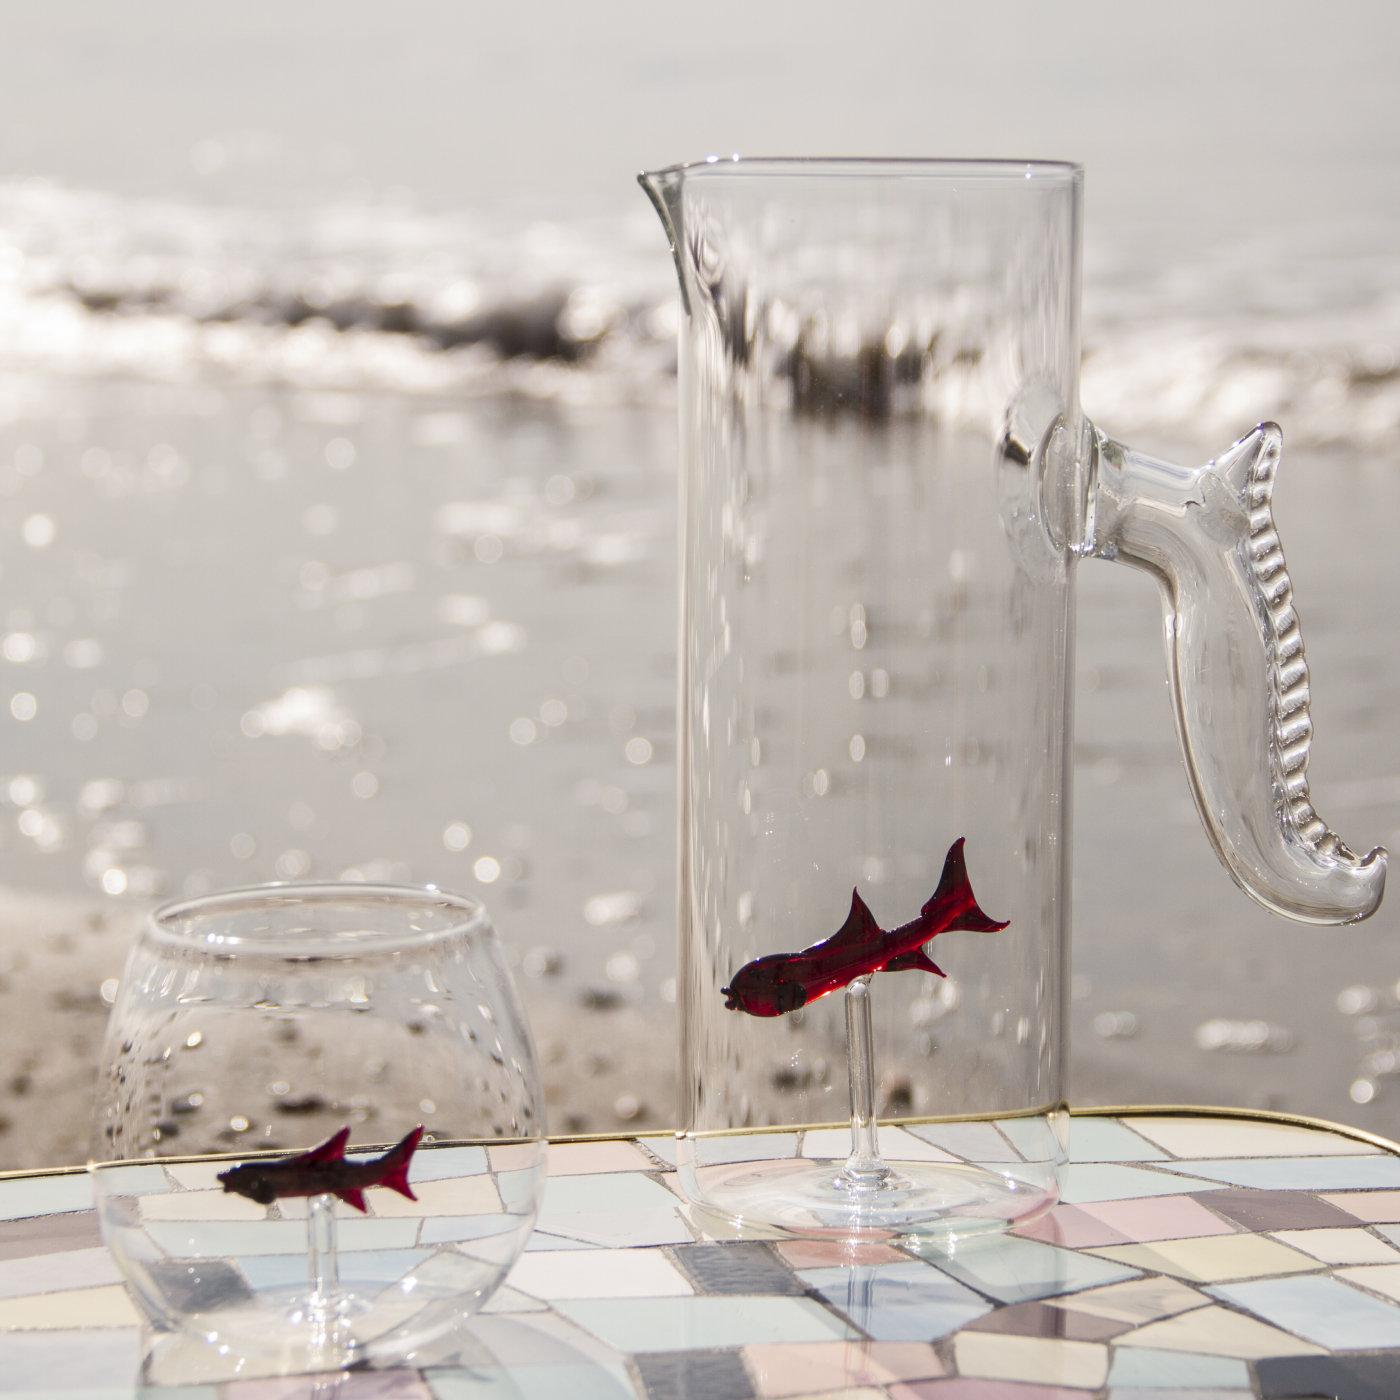 This little fish set will add a colorful and whimsical touch to any dining table. The tall transparent pitcher features a nautical handle and shares with the glasses the addition of an exquisitely rendered glass fish that seems to float thanks to a